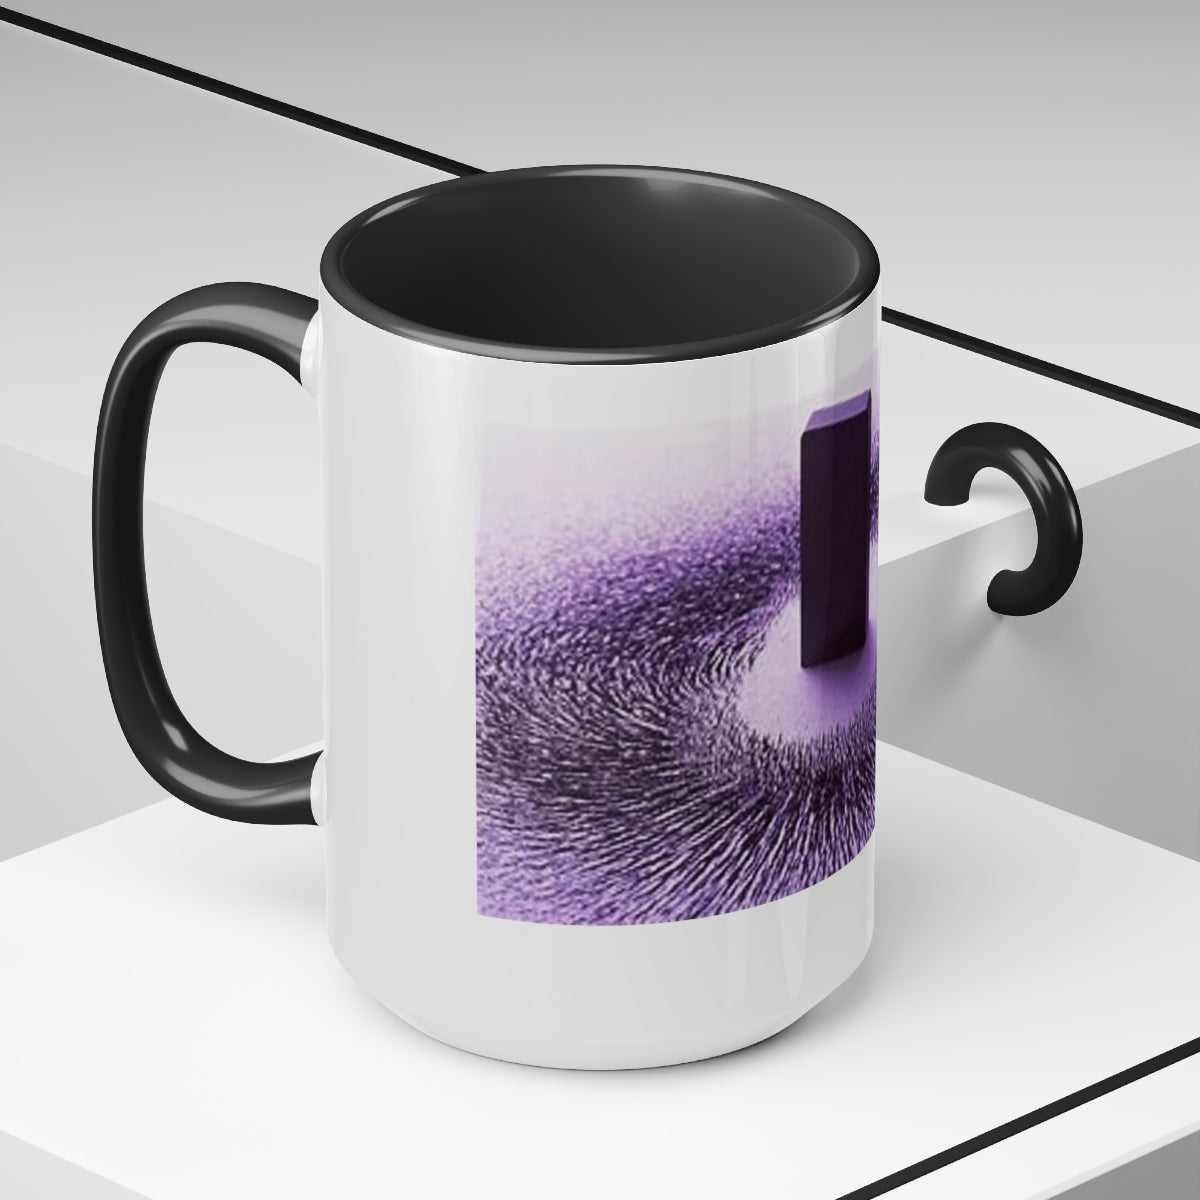 Abstract Design Glitch Style. Trendy pattern Coffee Mug by Ahmet